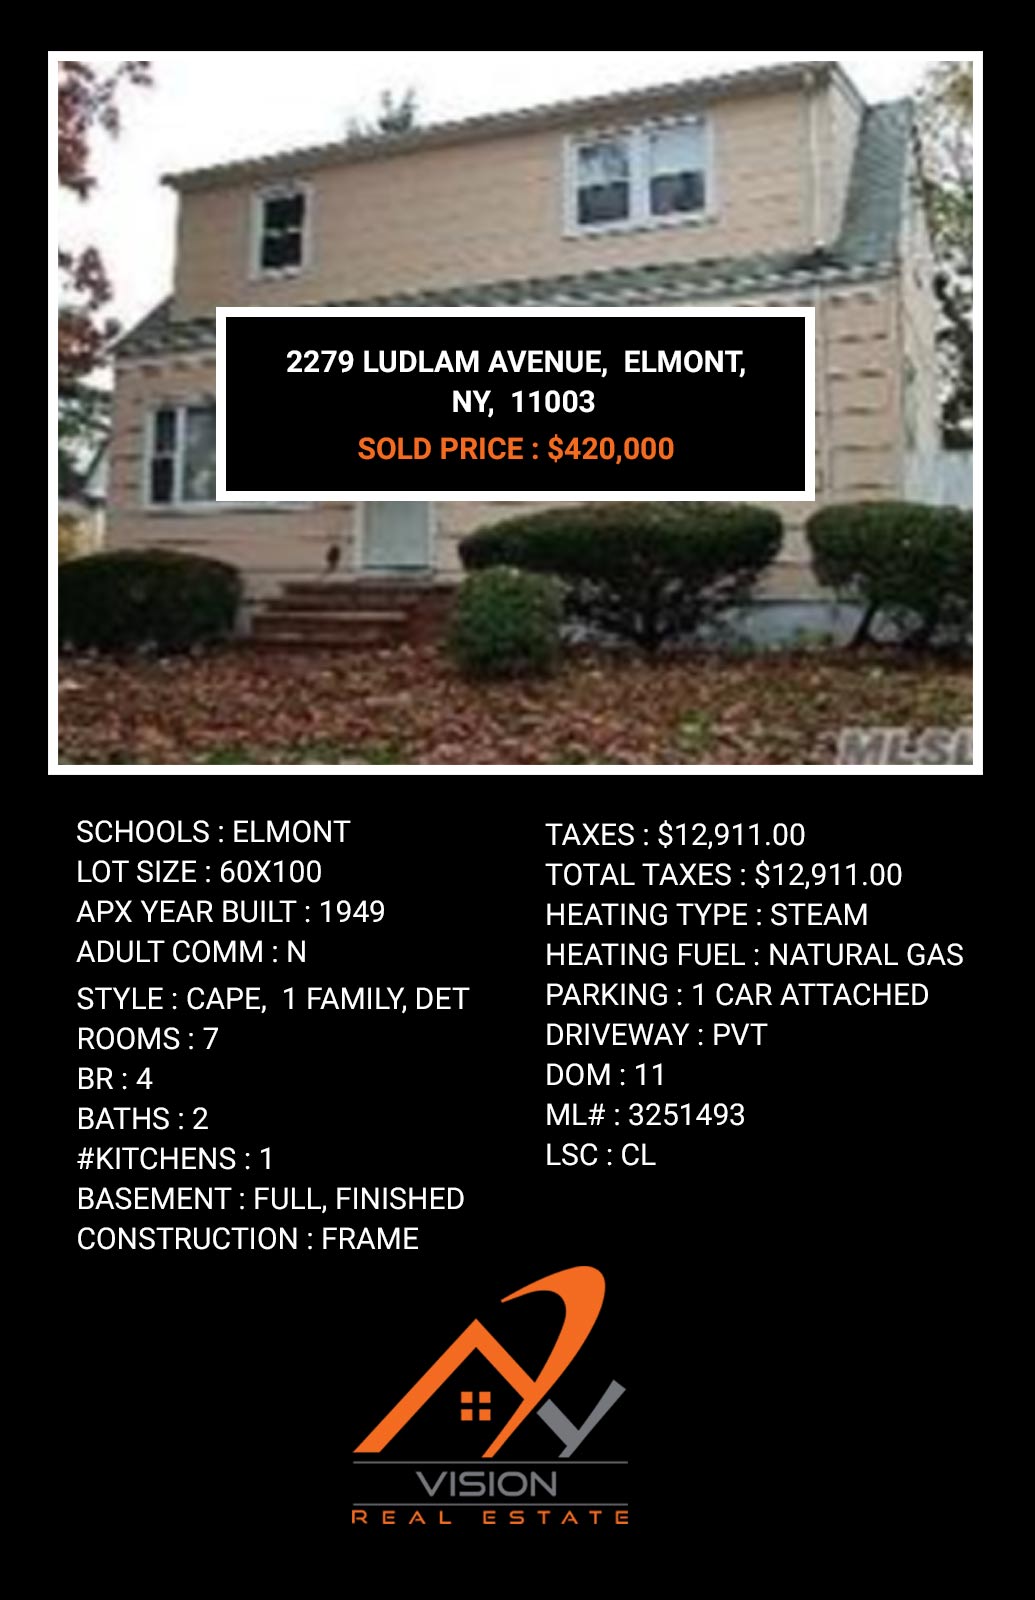 Homes for Sale Elmont, NY